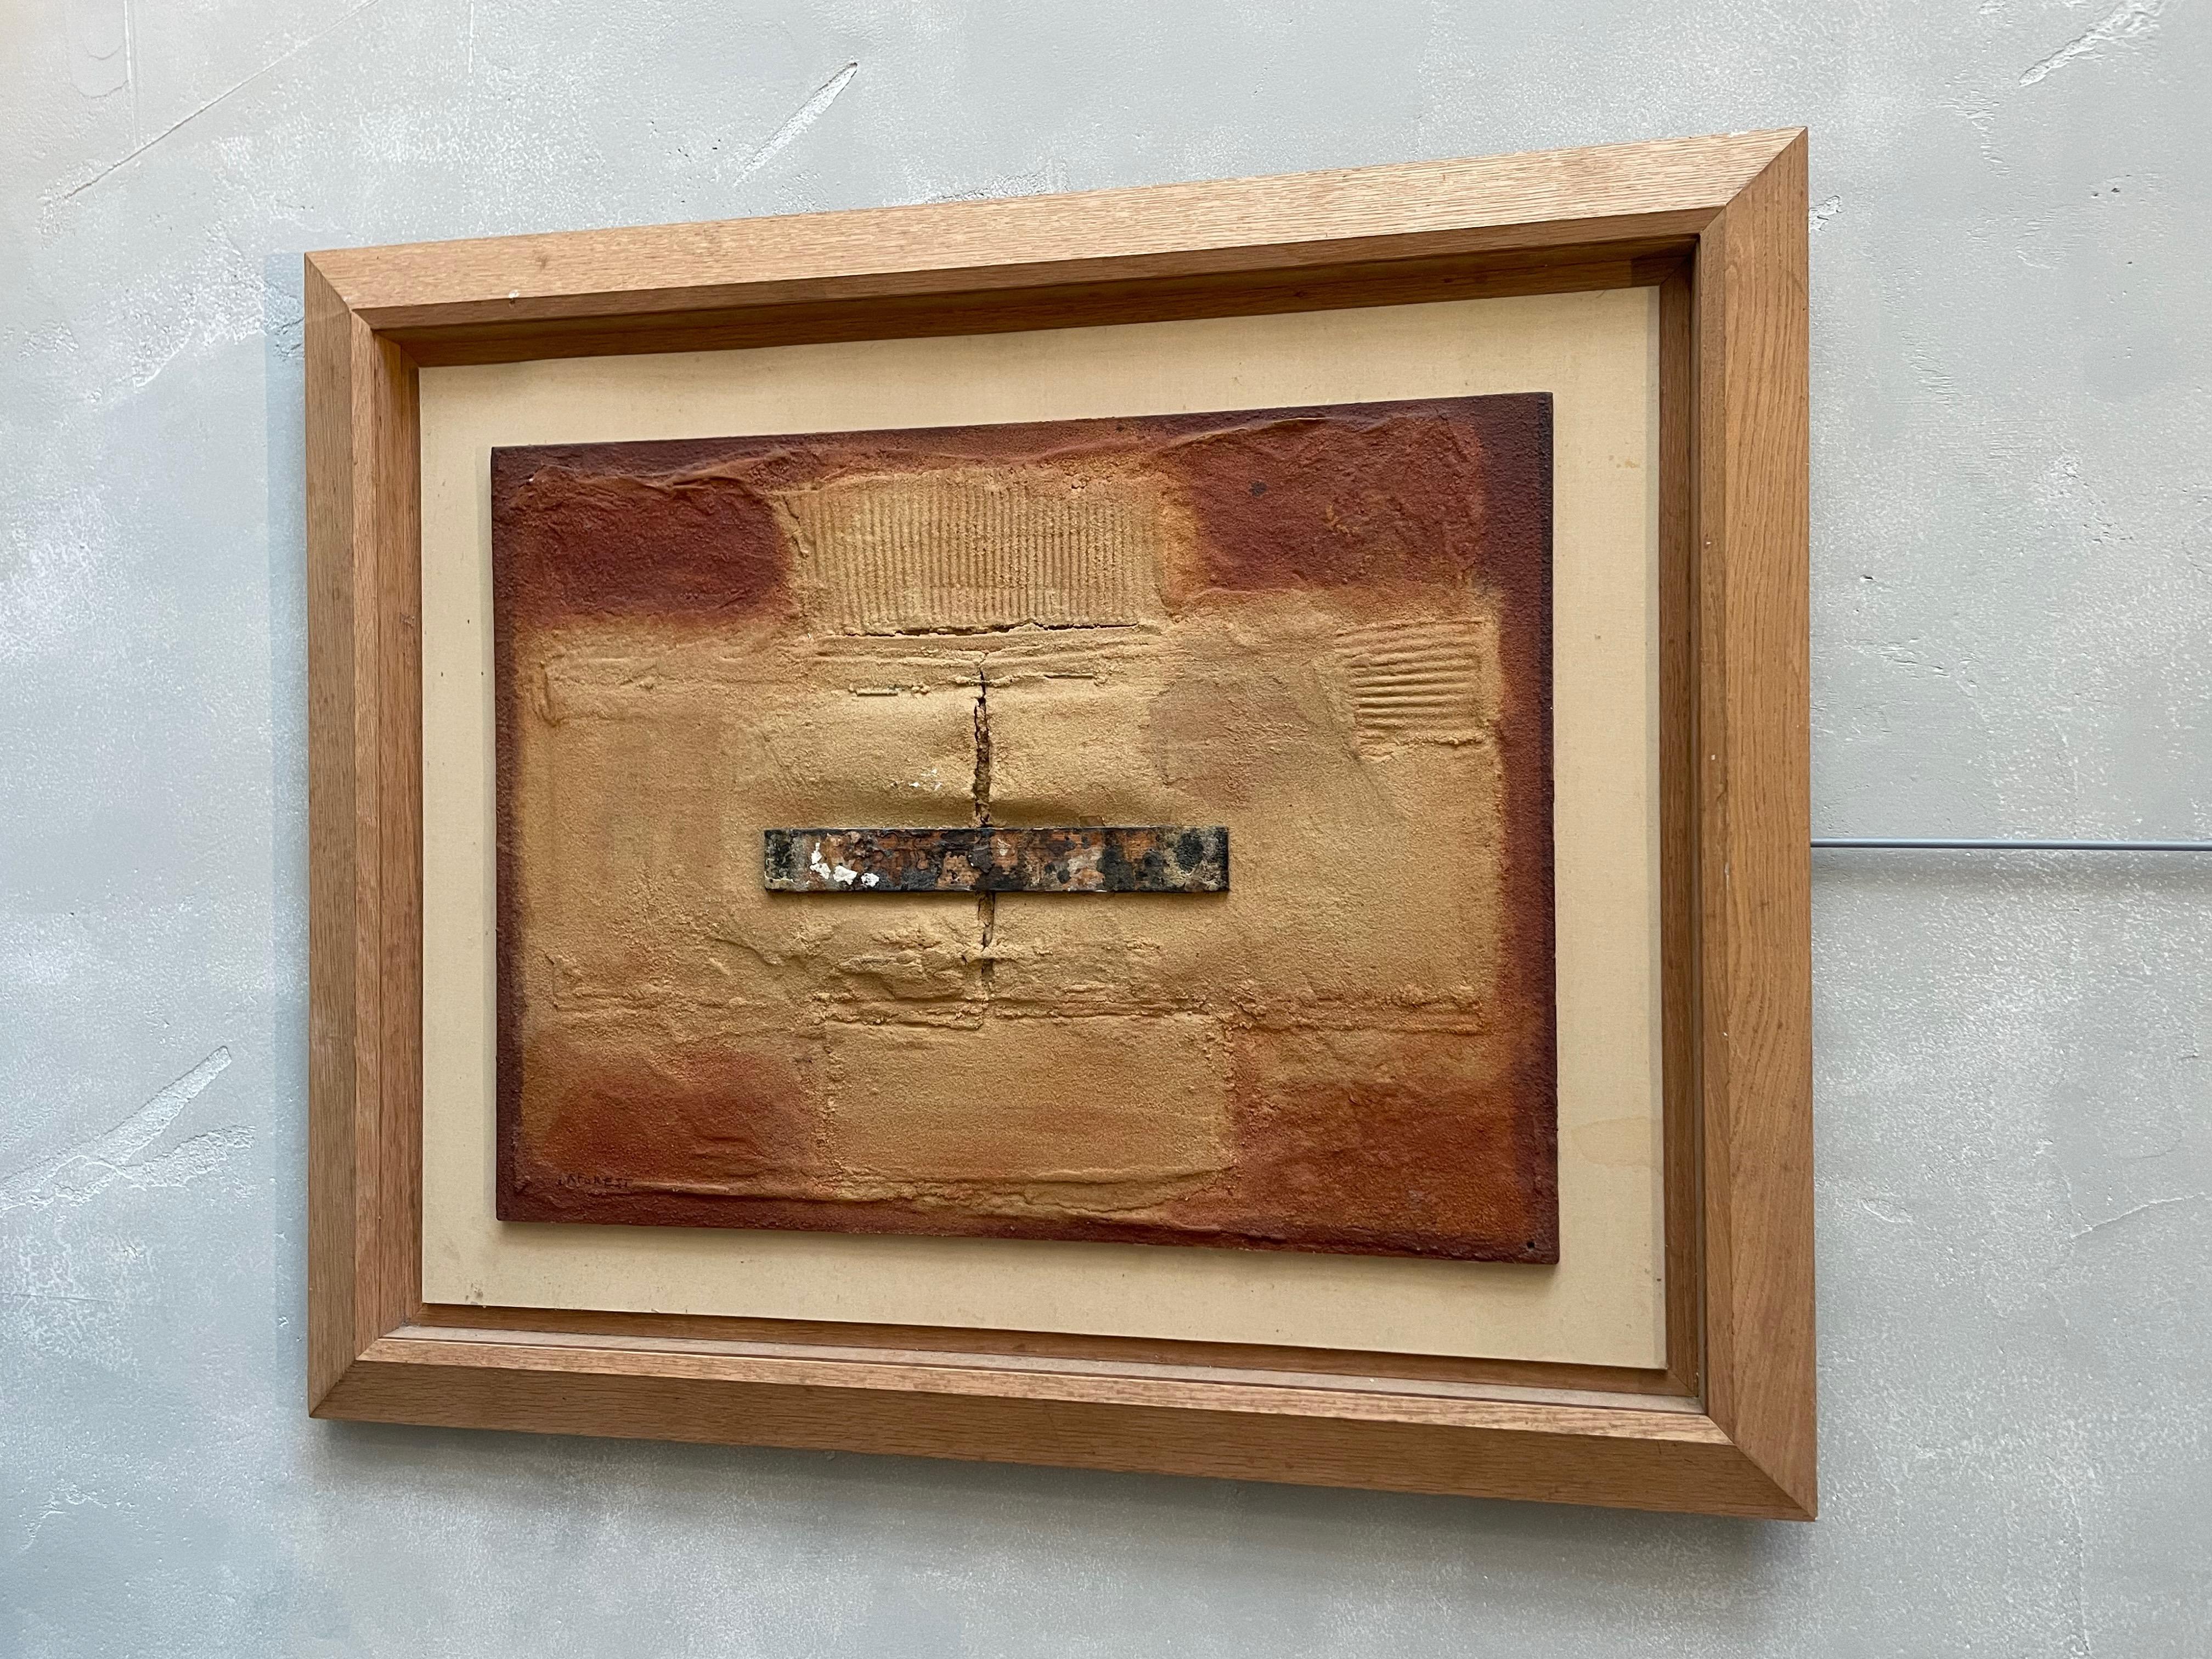 1980's French abstract by artist Largrest.
Terracotta and beige hi-lo textured paint.
Weathered metal bar in center of painting.
Oak frame.
Signed by the artist.
